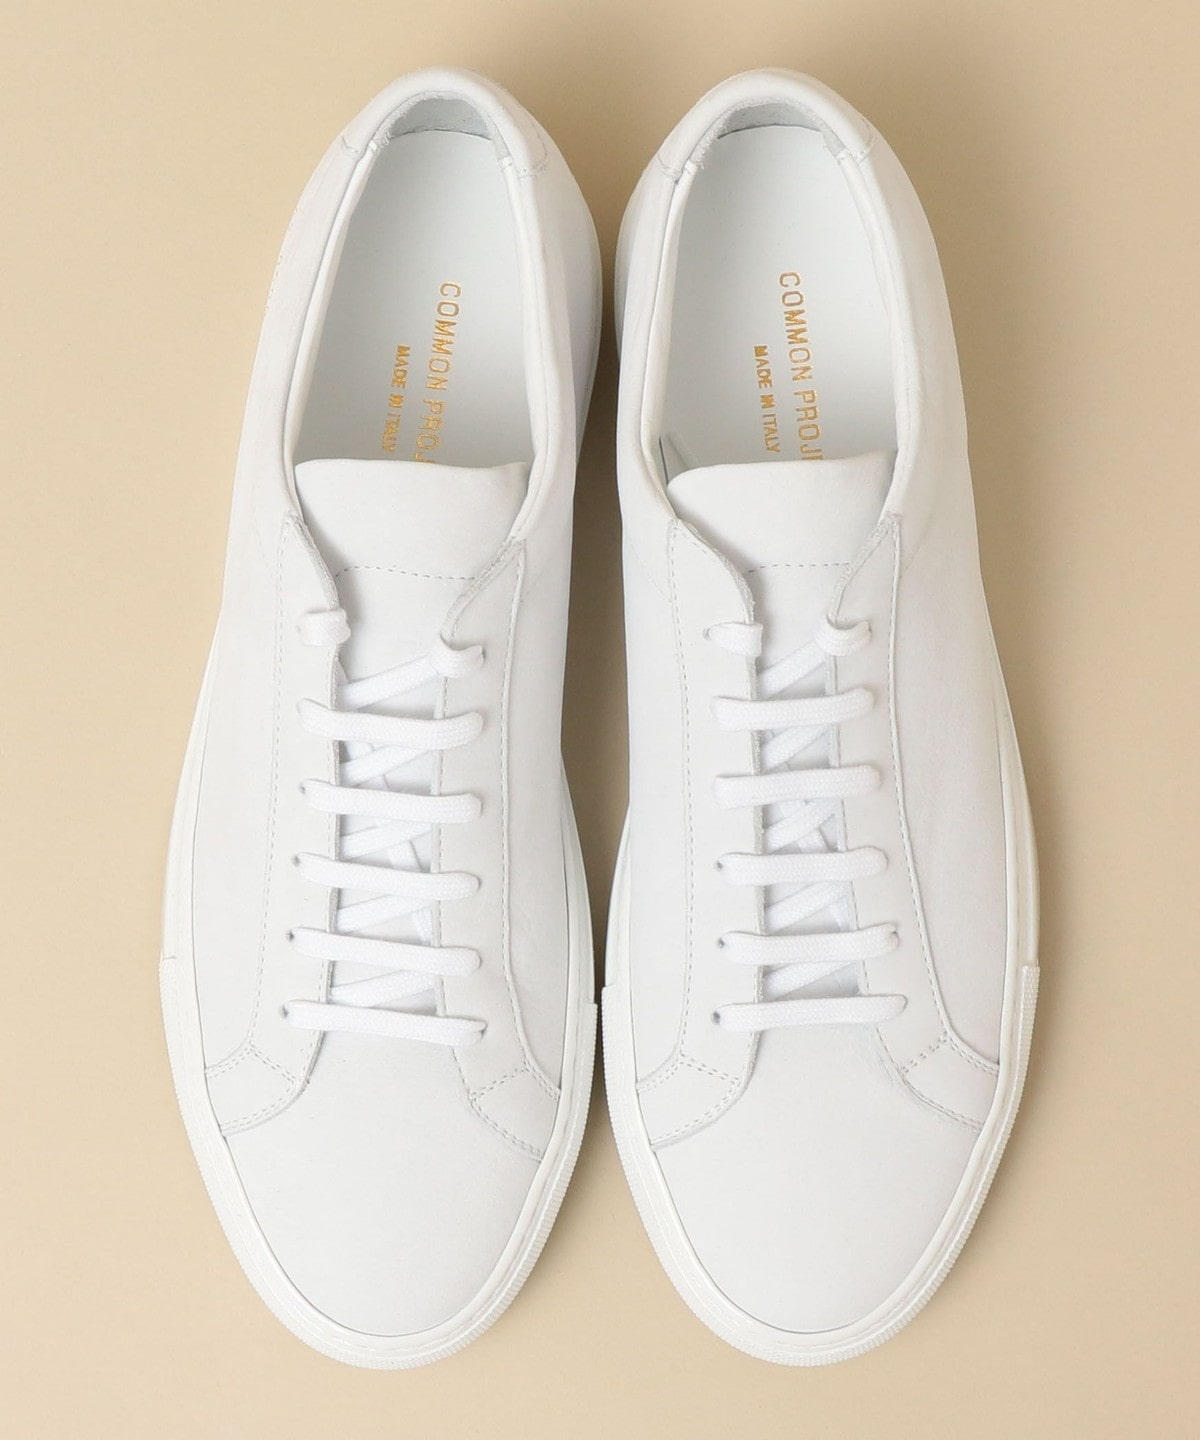 COMMON PROJECTS: Achilles ヌバック スニーカー: シューズ SHIPS 公式 